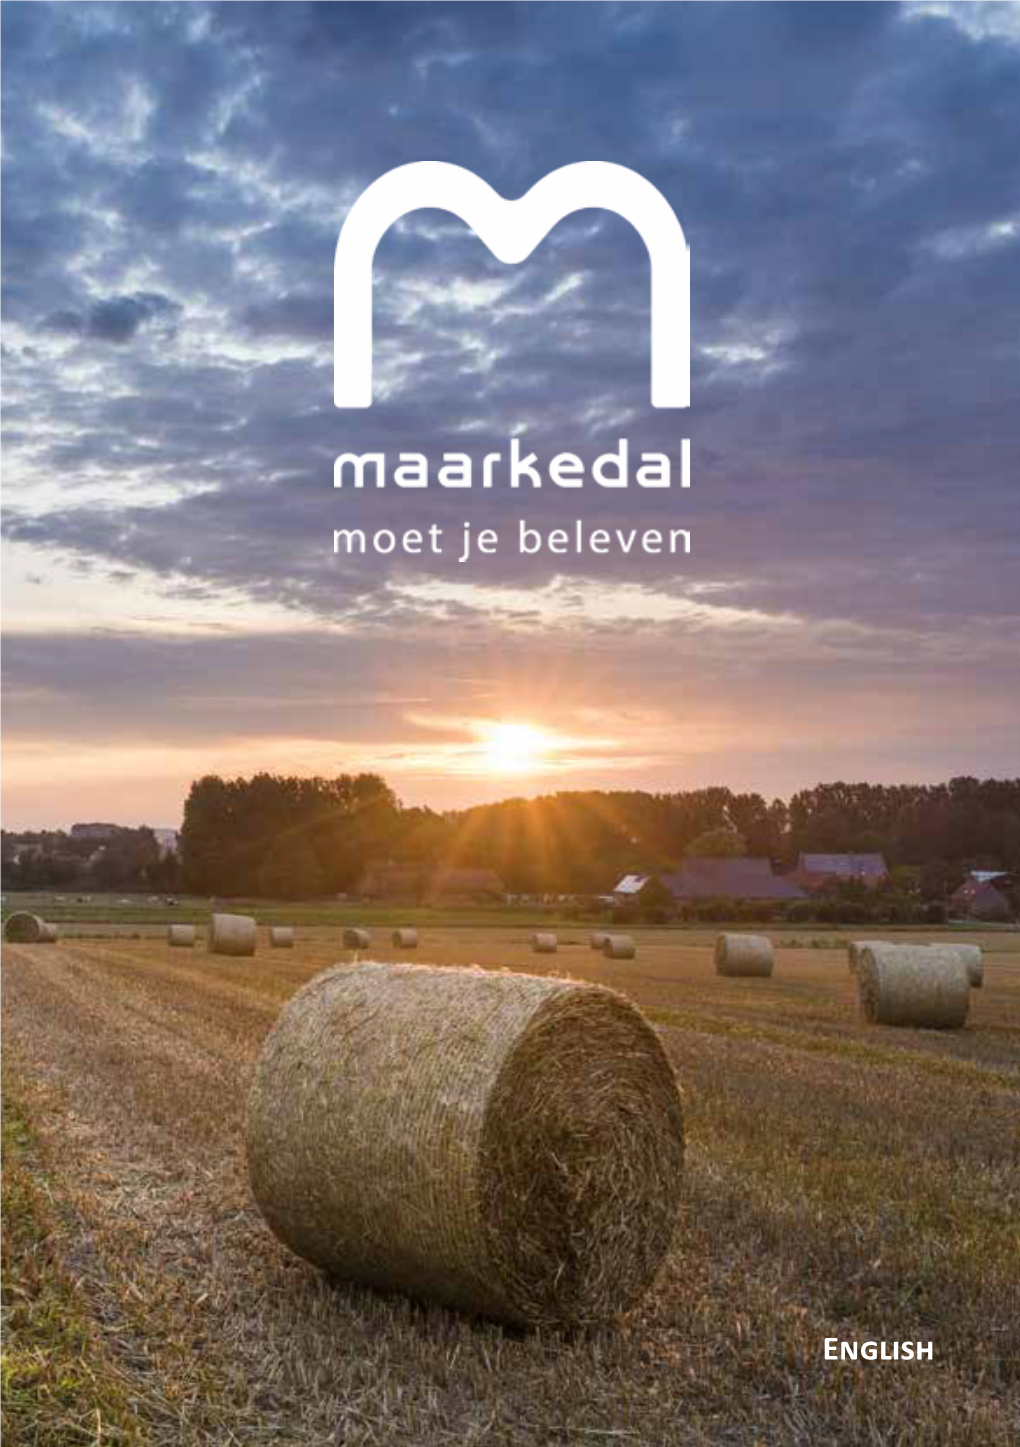 English Maarkedal, the Flemish Ardennes at Their Best